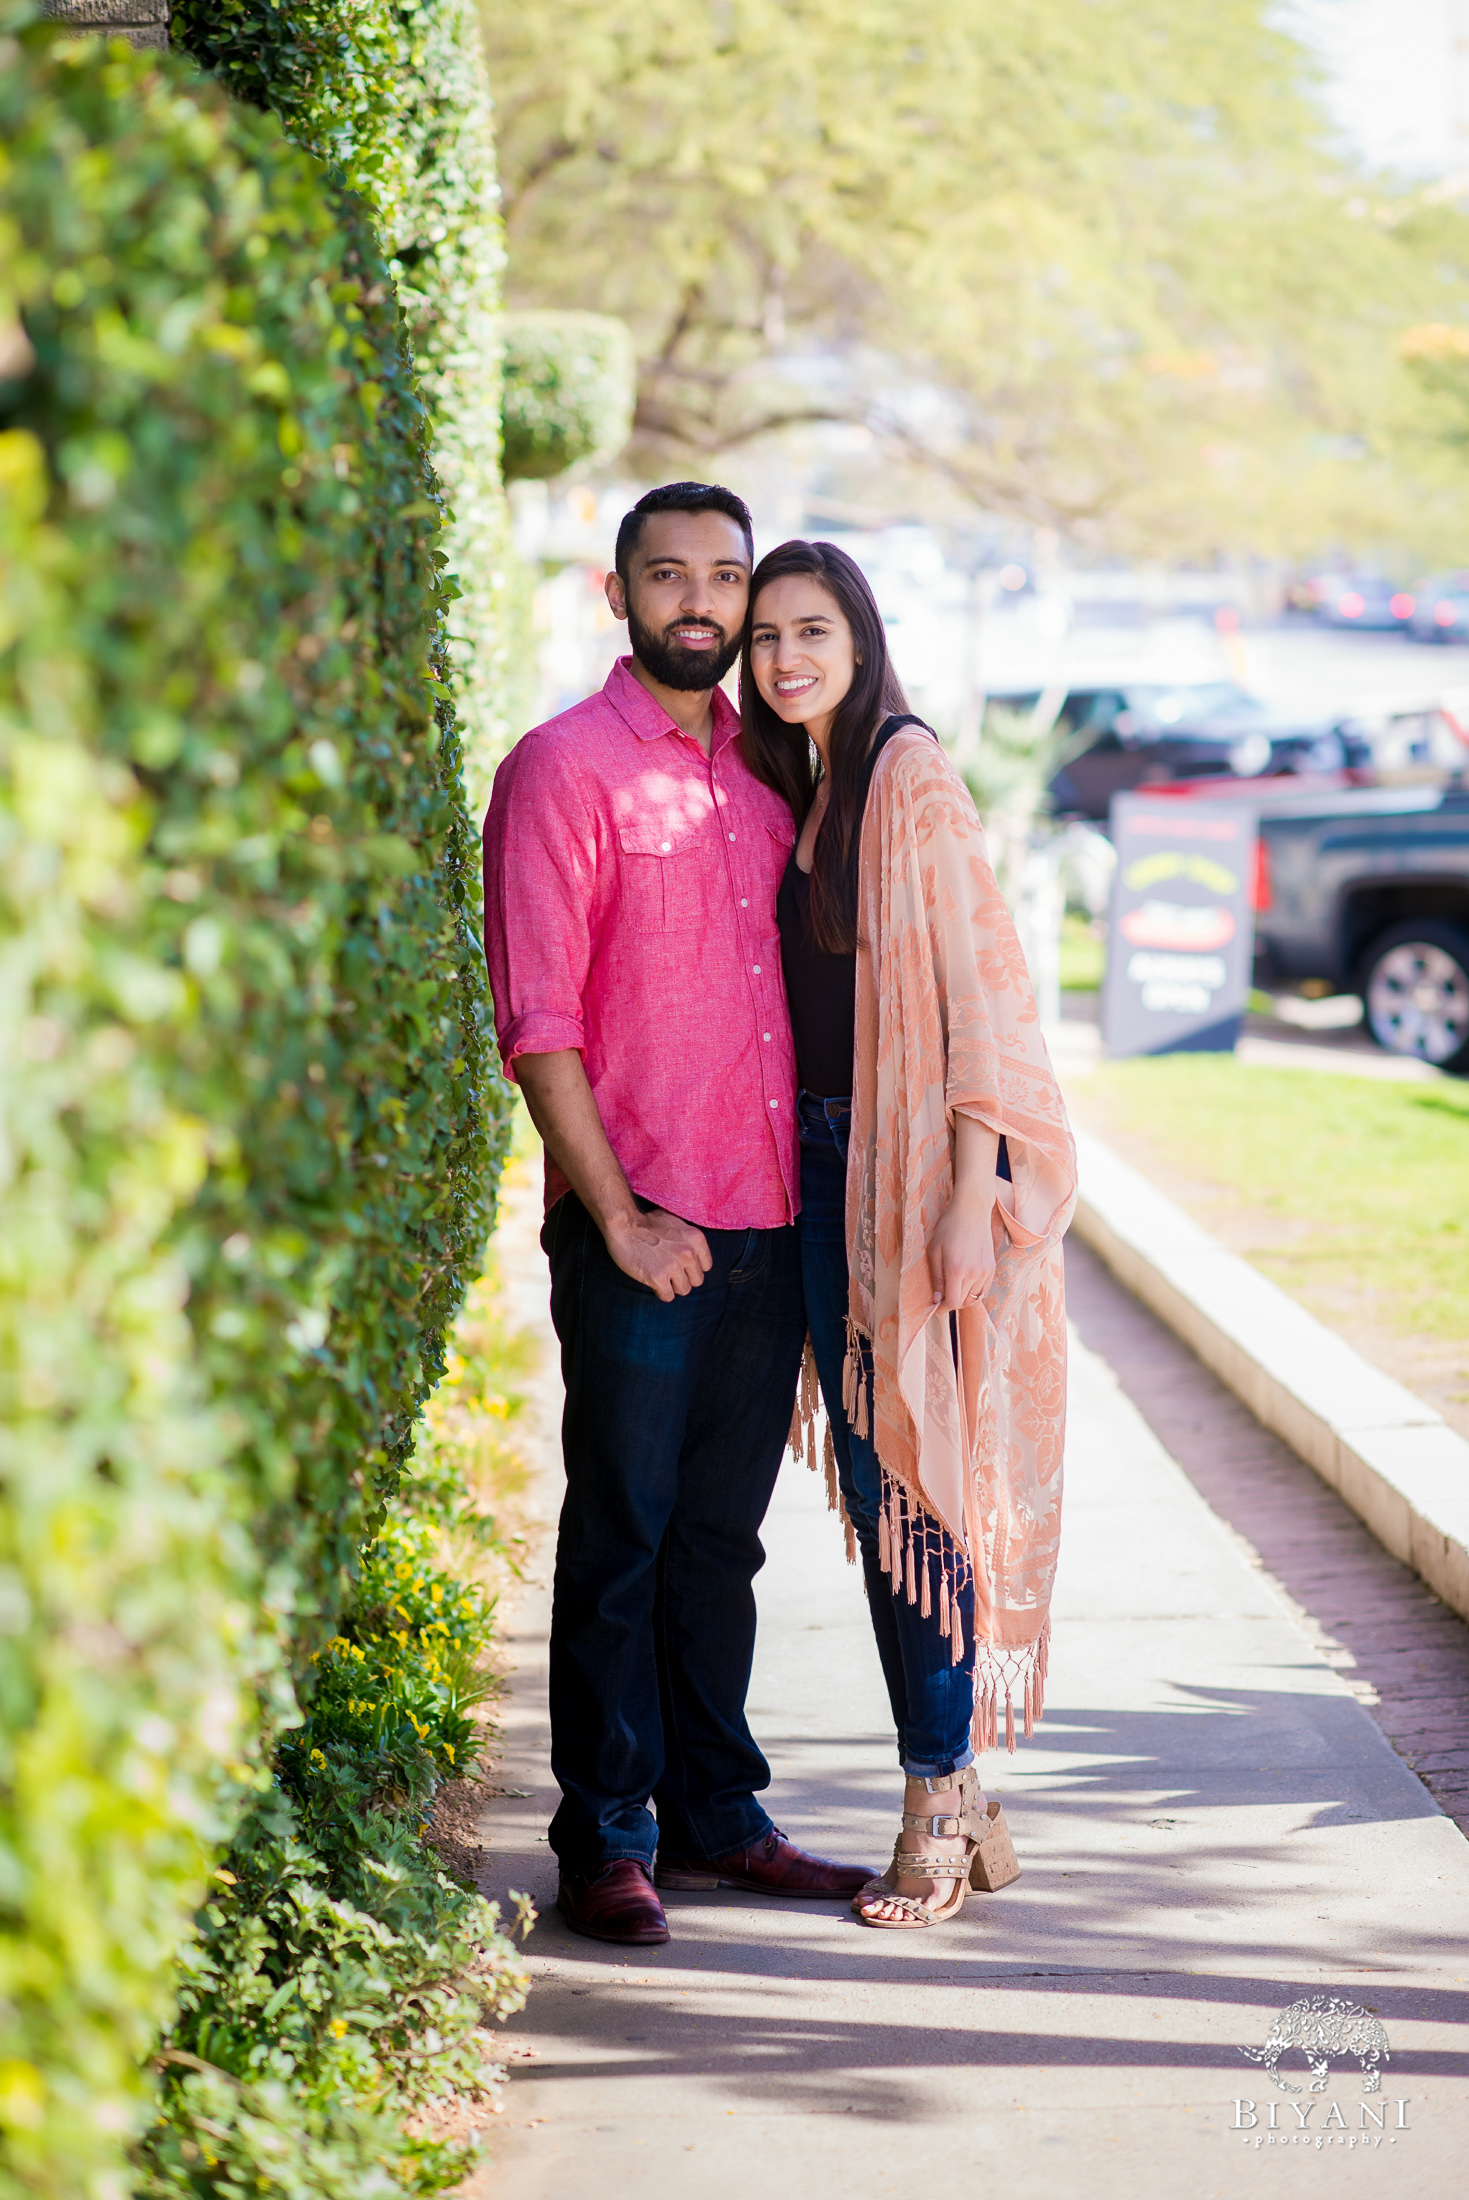 An Indian couple posing on the streets of South Congress Austin, TX for their engagement photo shoot